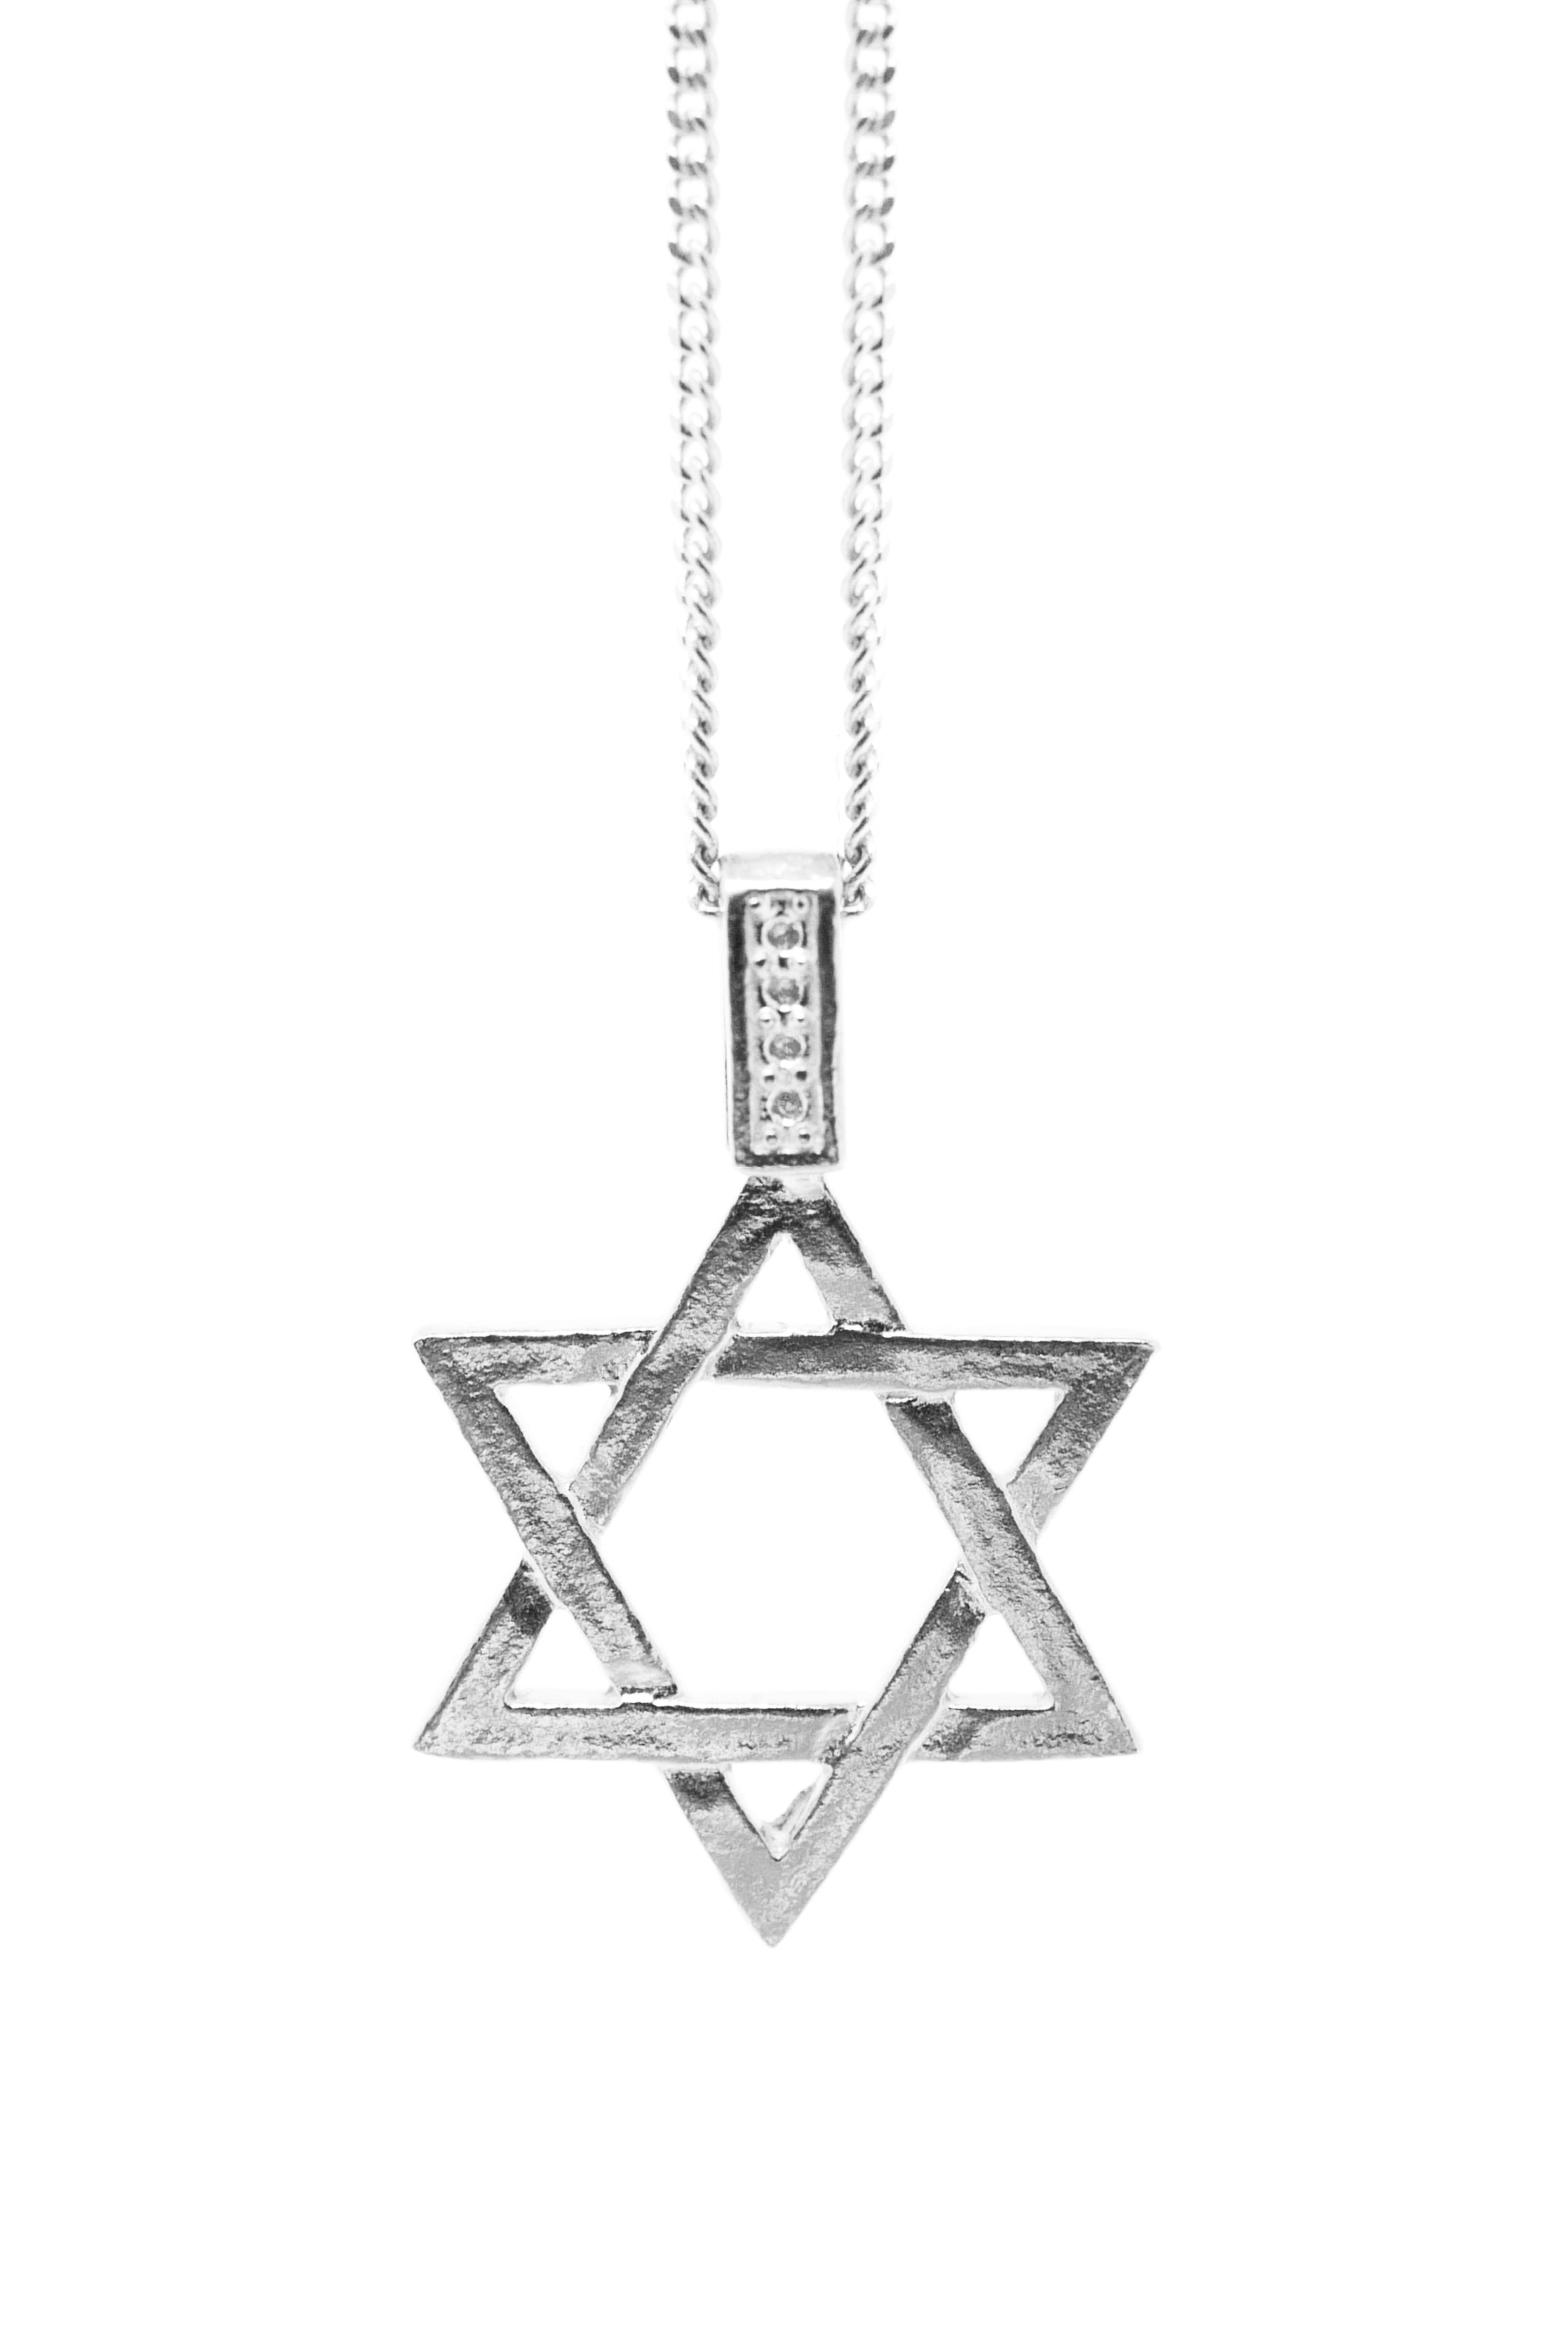 THE STAR of David Necklace II